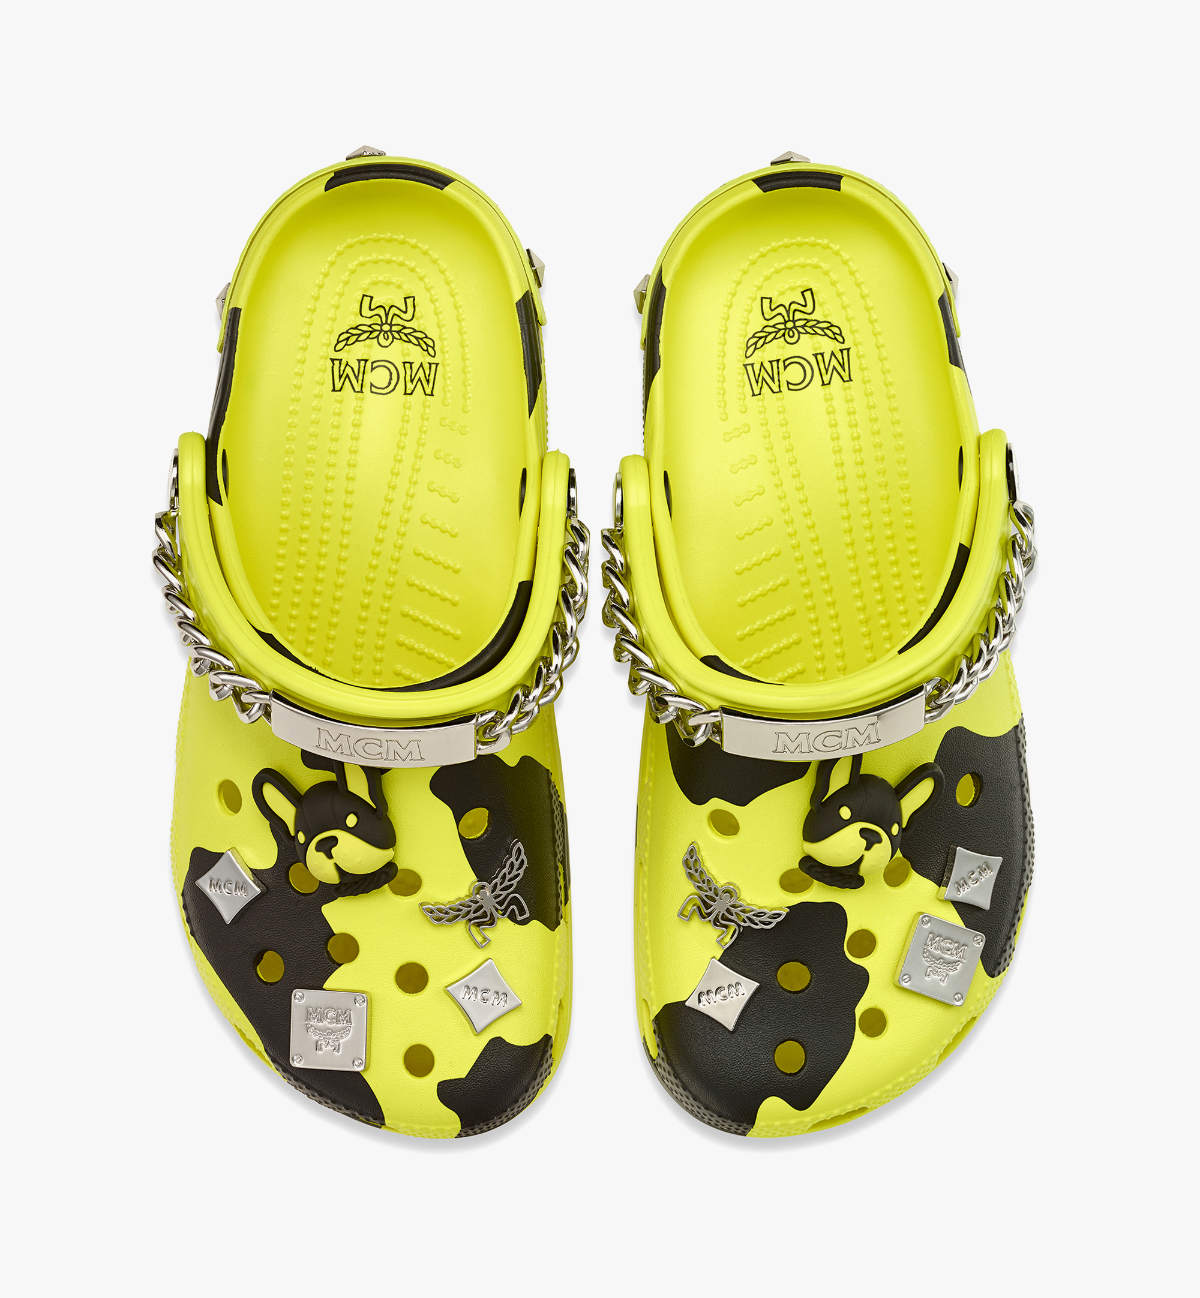 MCM X Crocs Collaborate On Limited-Edition Release